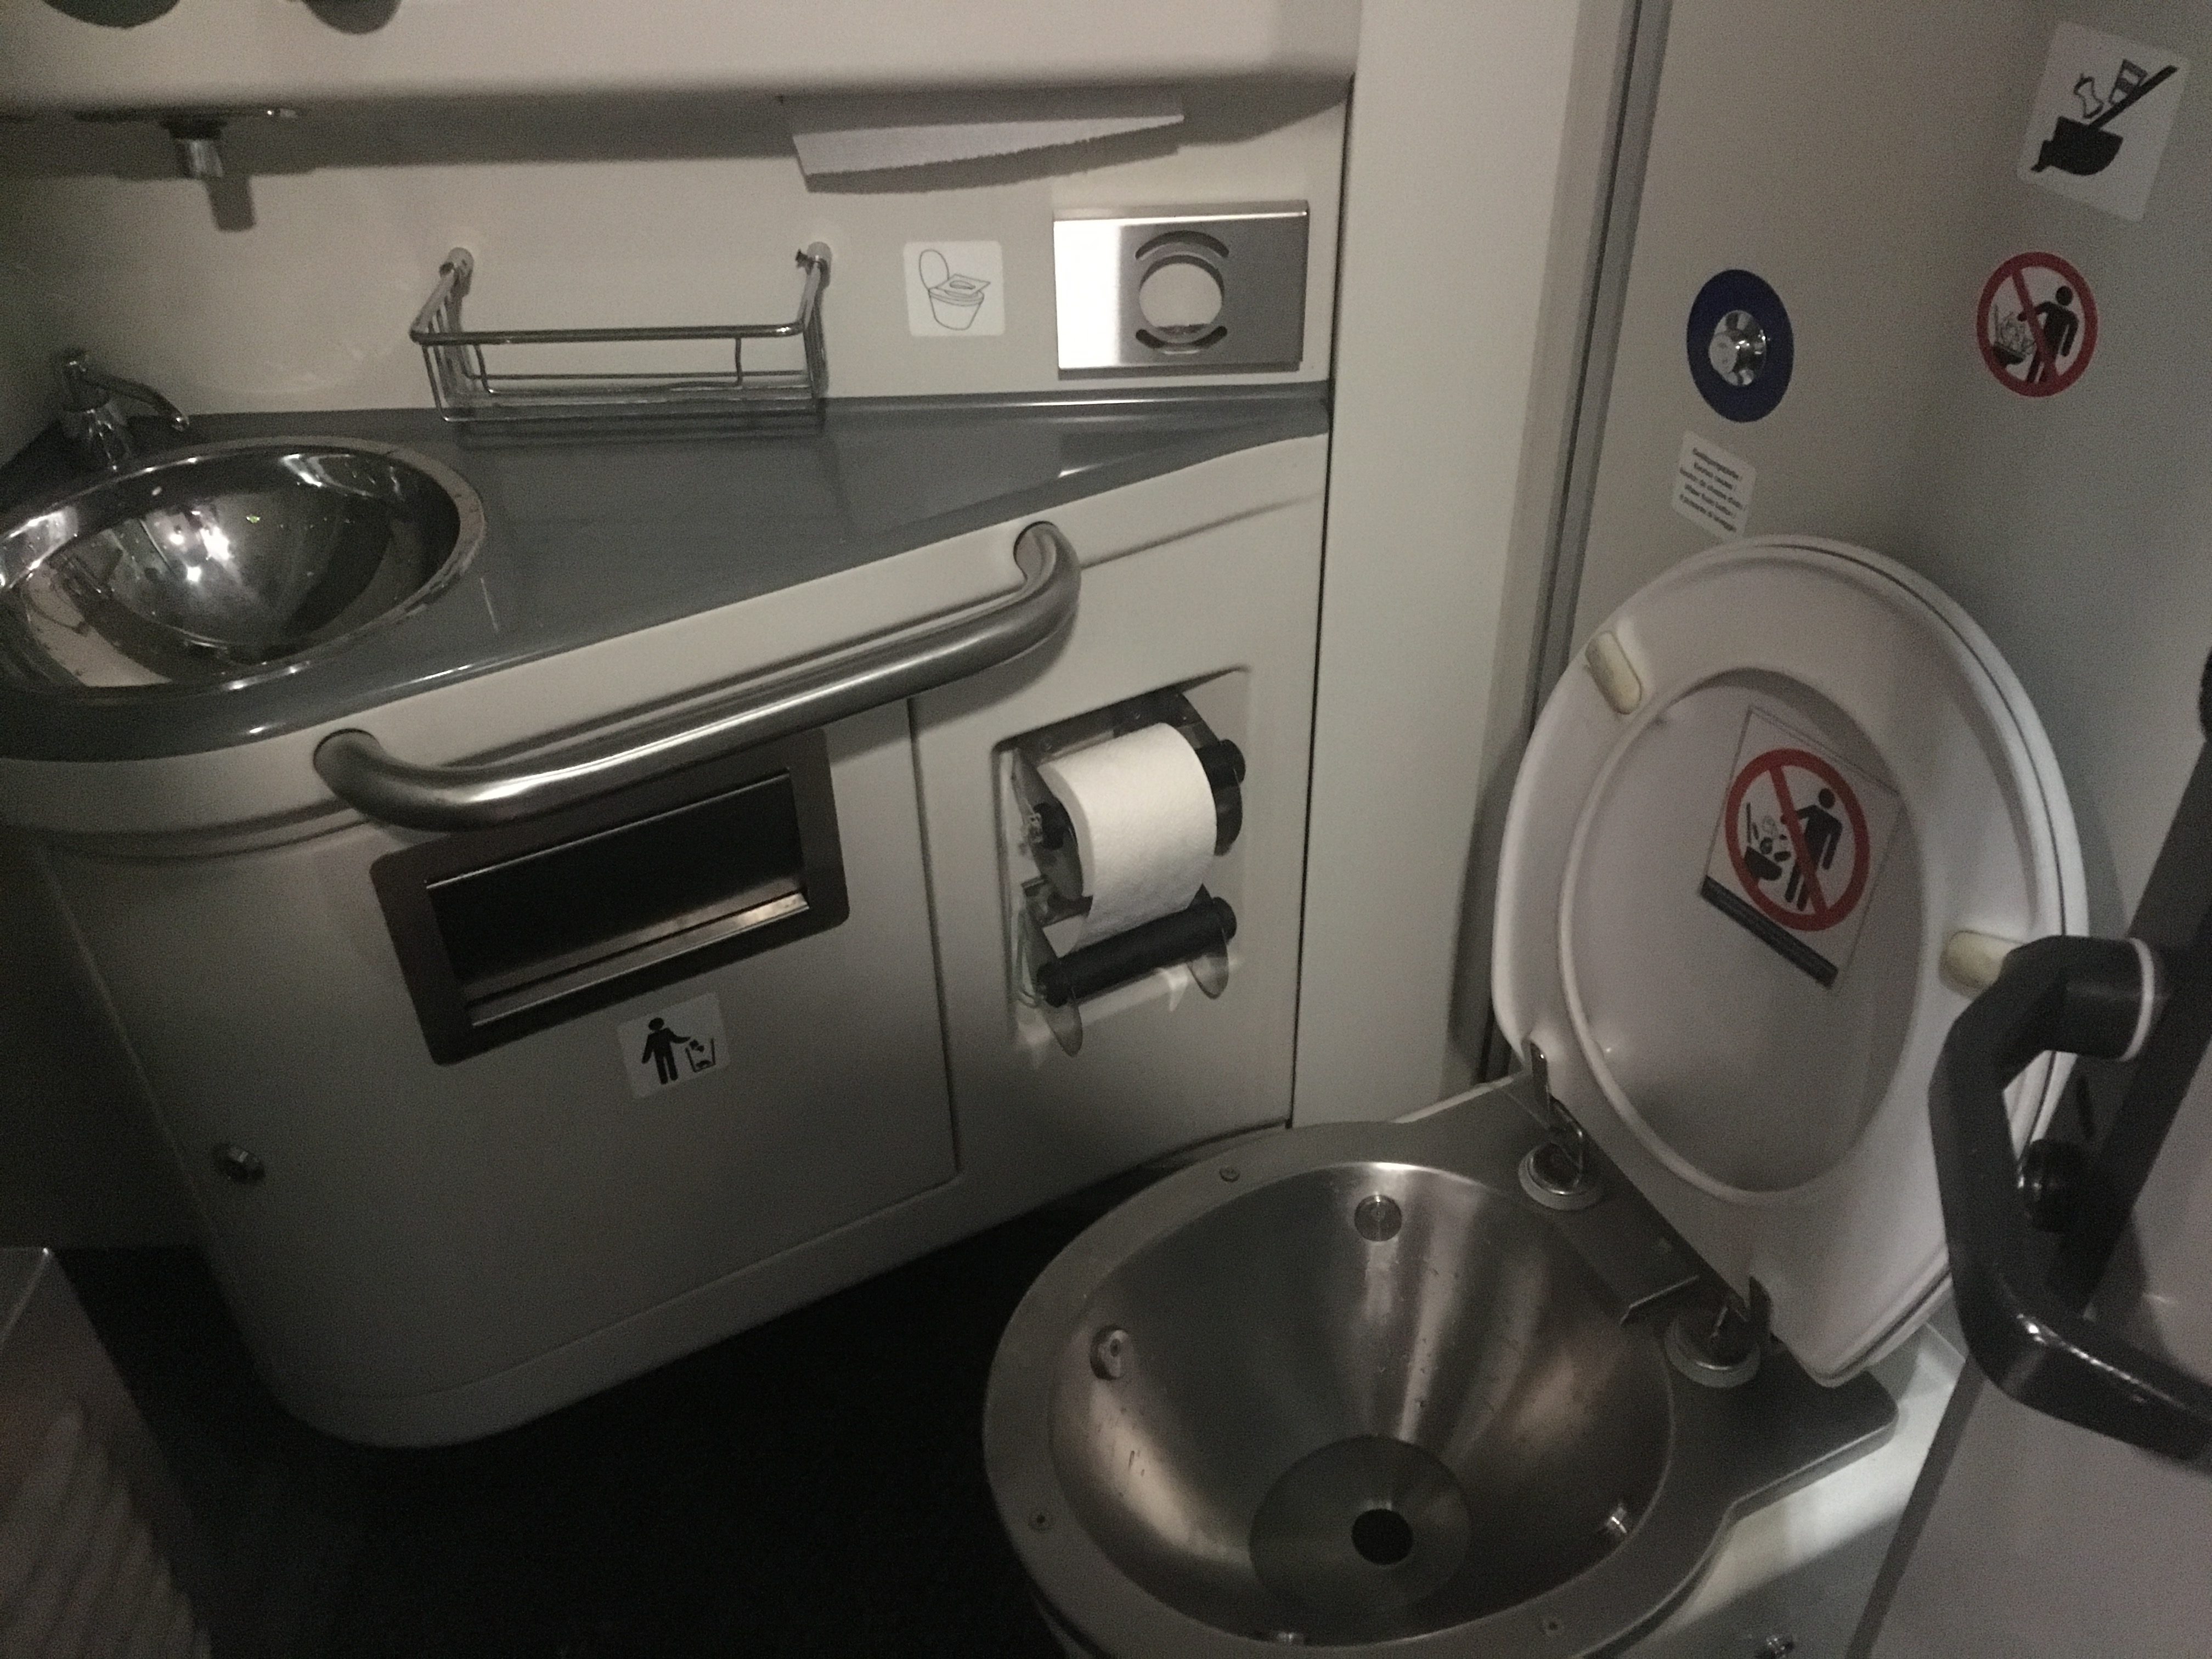 Russian train toilet - clean and orderly